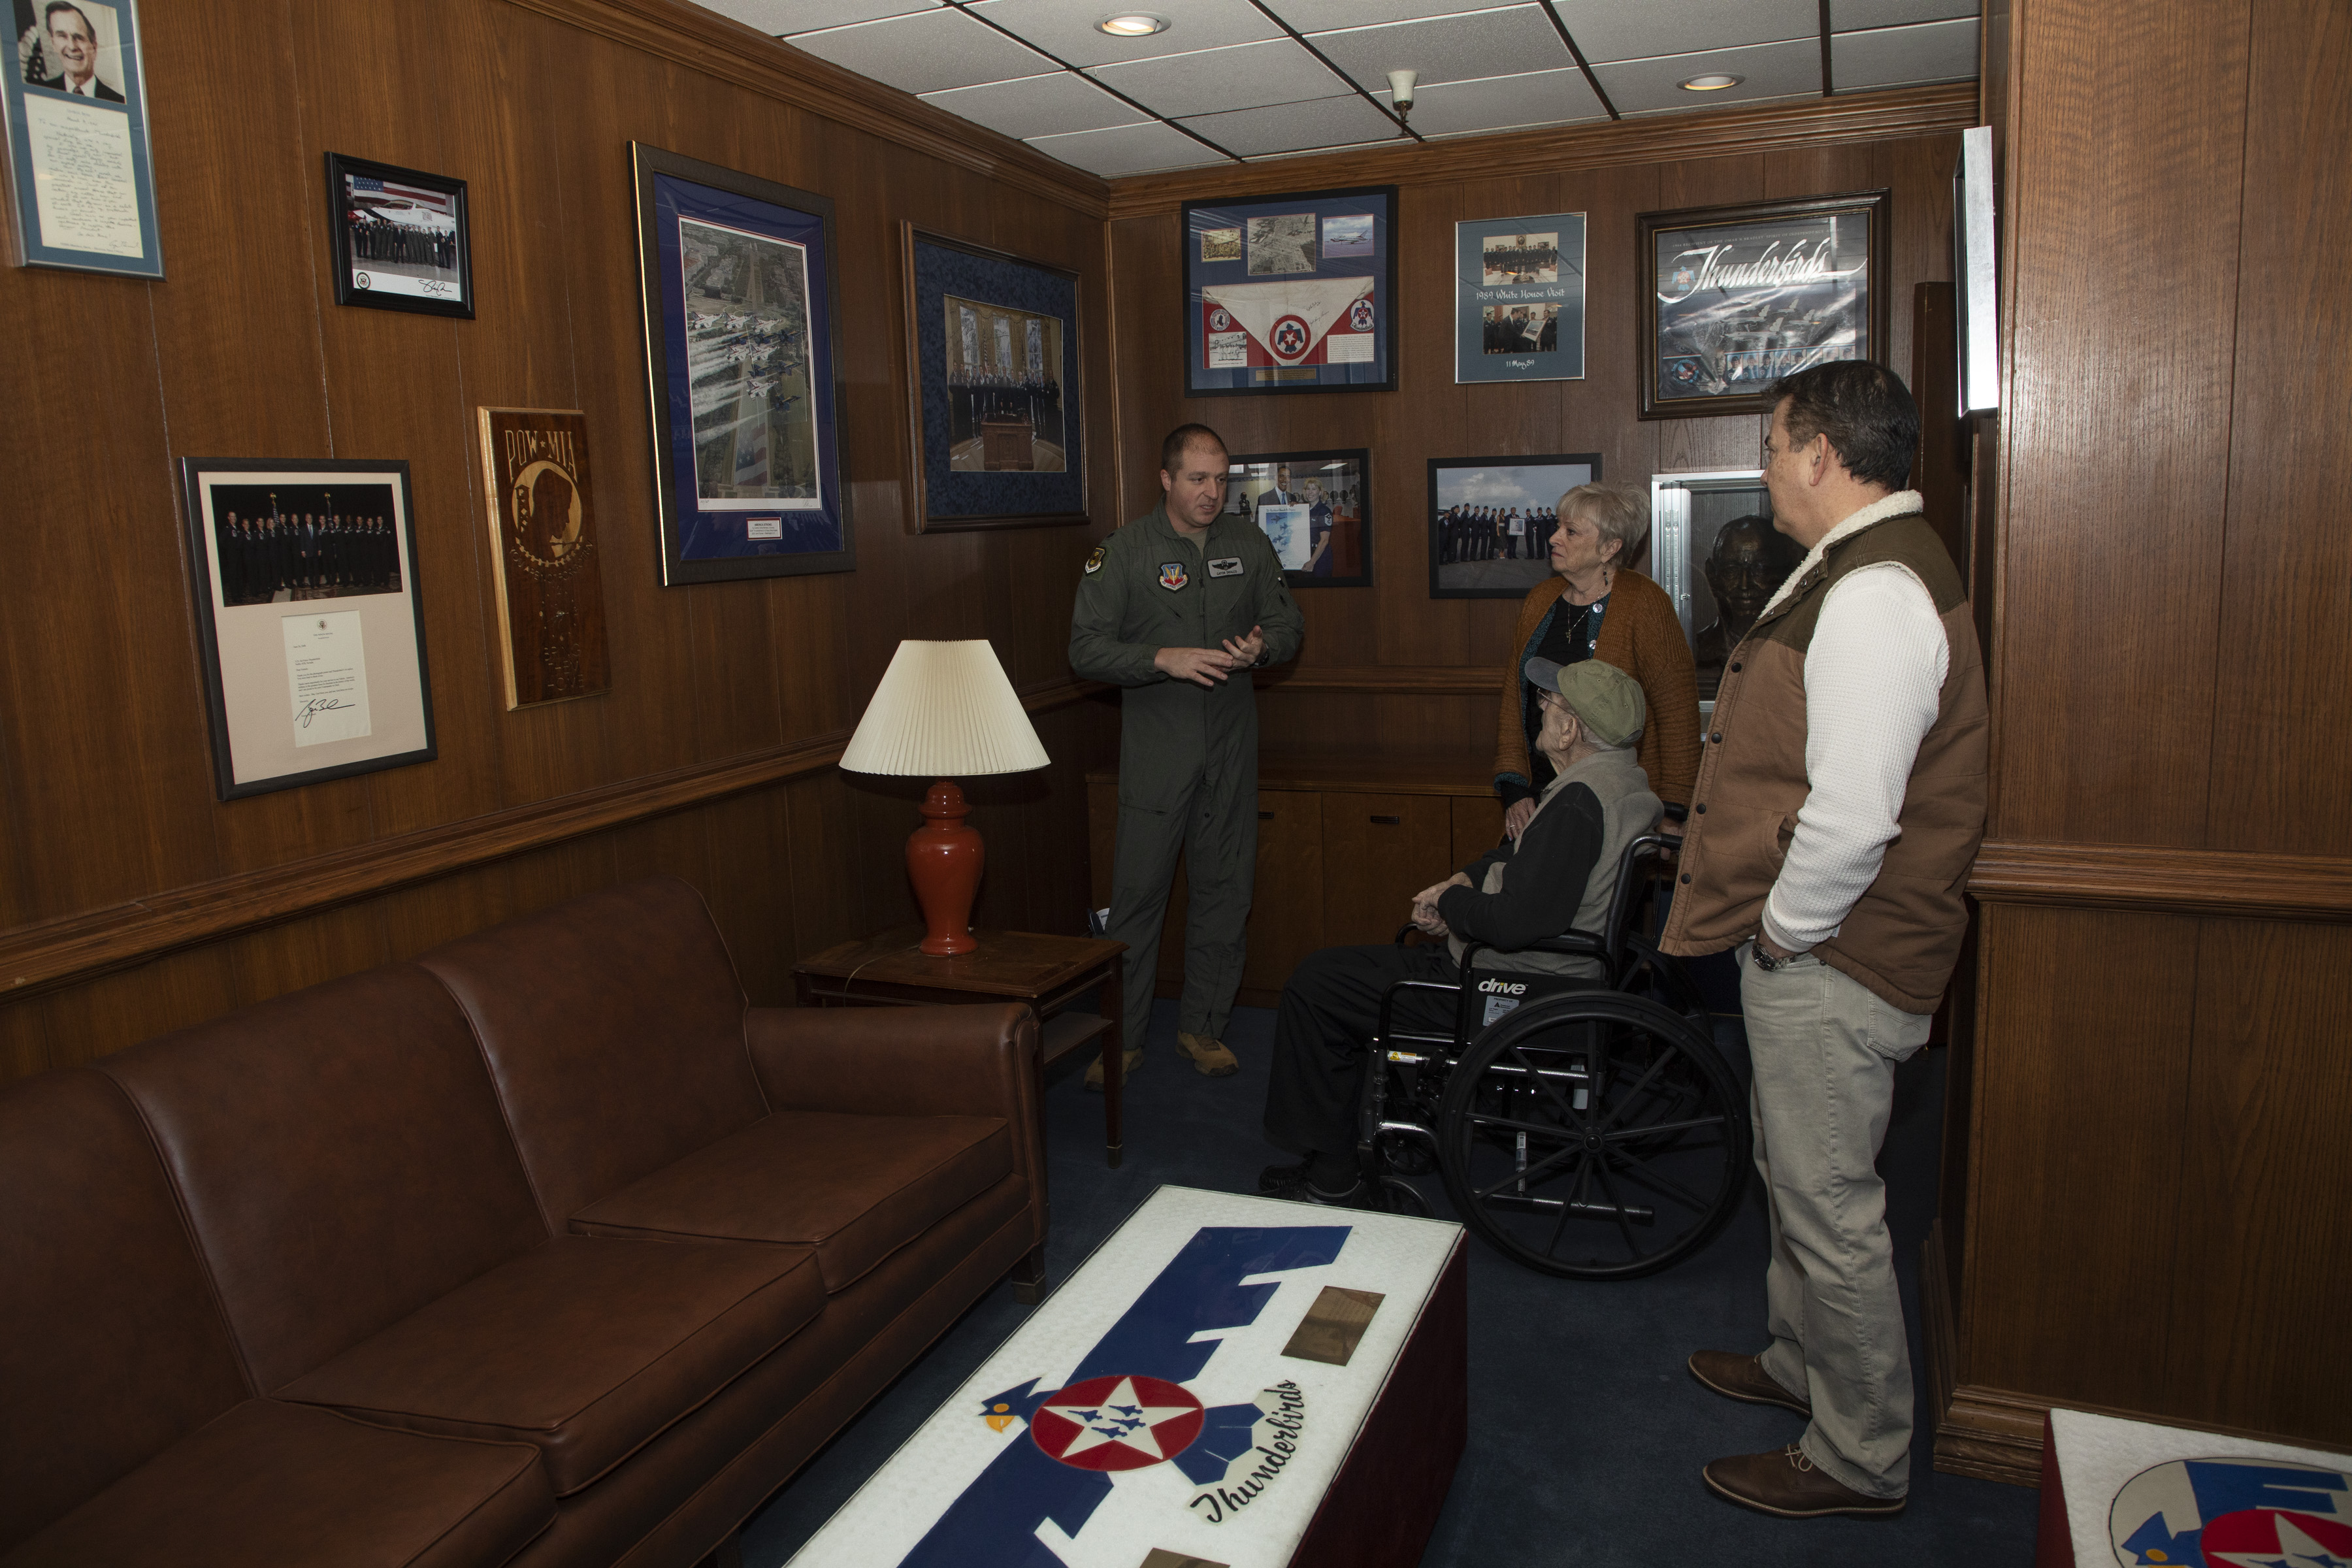 Image shows room with pictures and RAF Veteran, United States Air Force personnel and civilians.